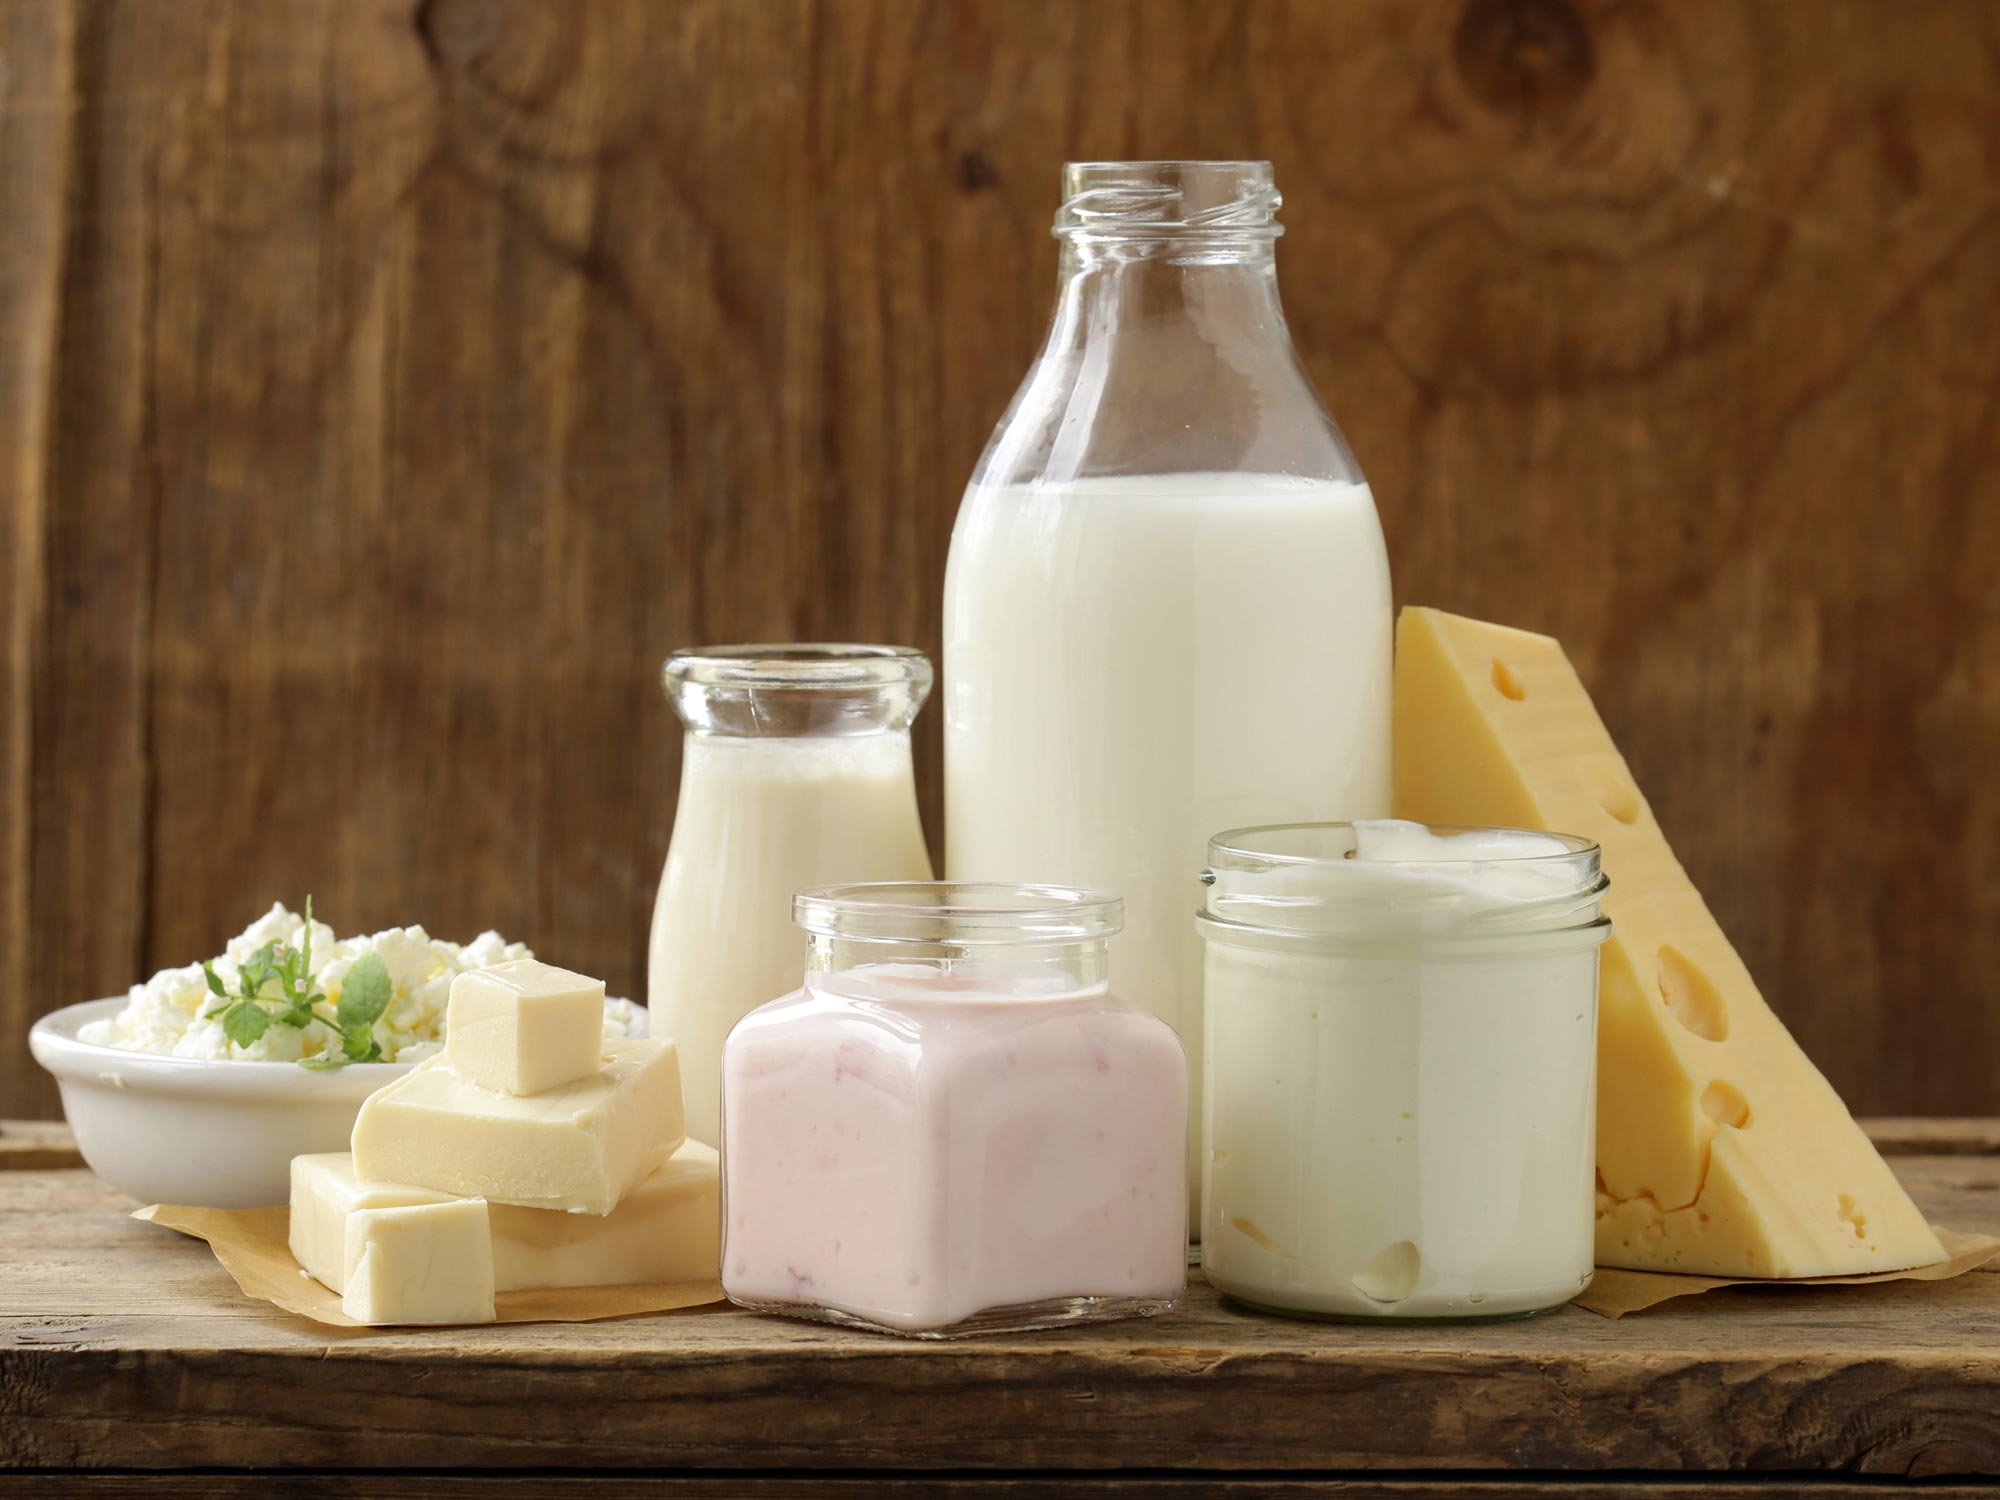 Organic Dairy Products